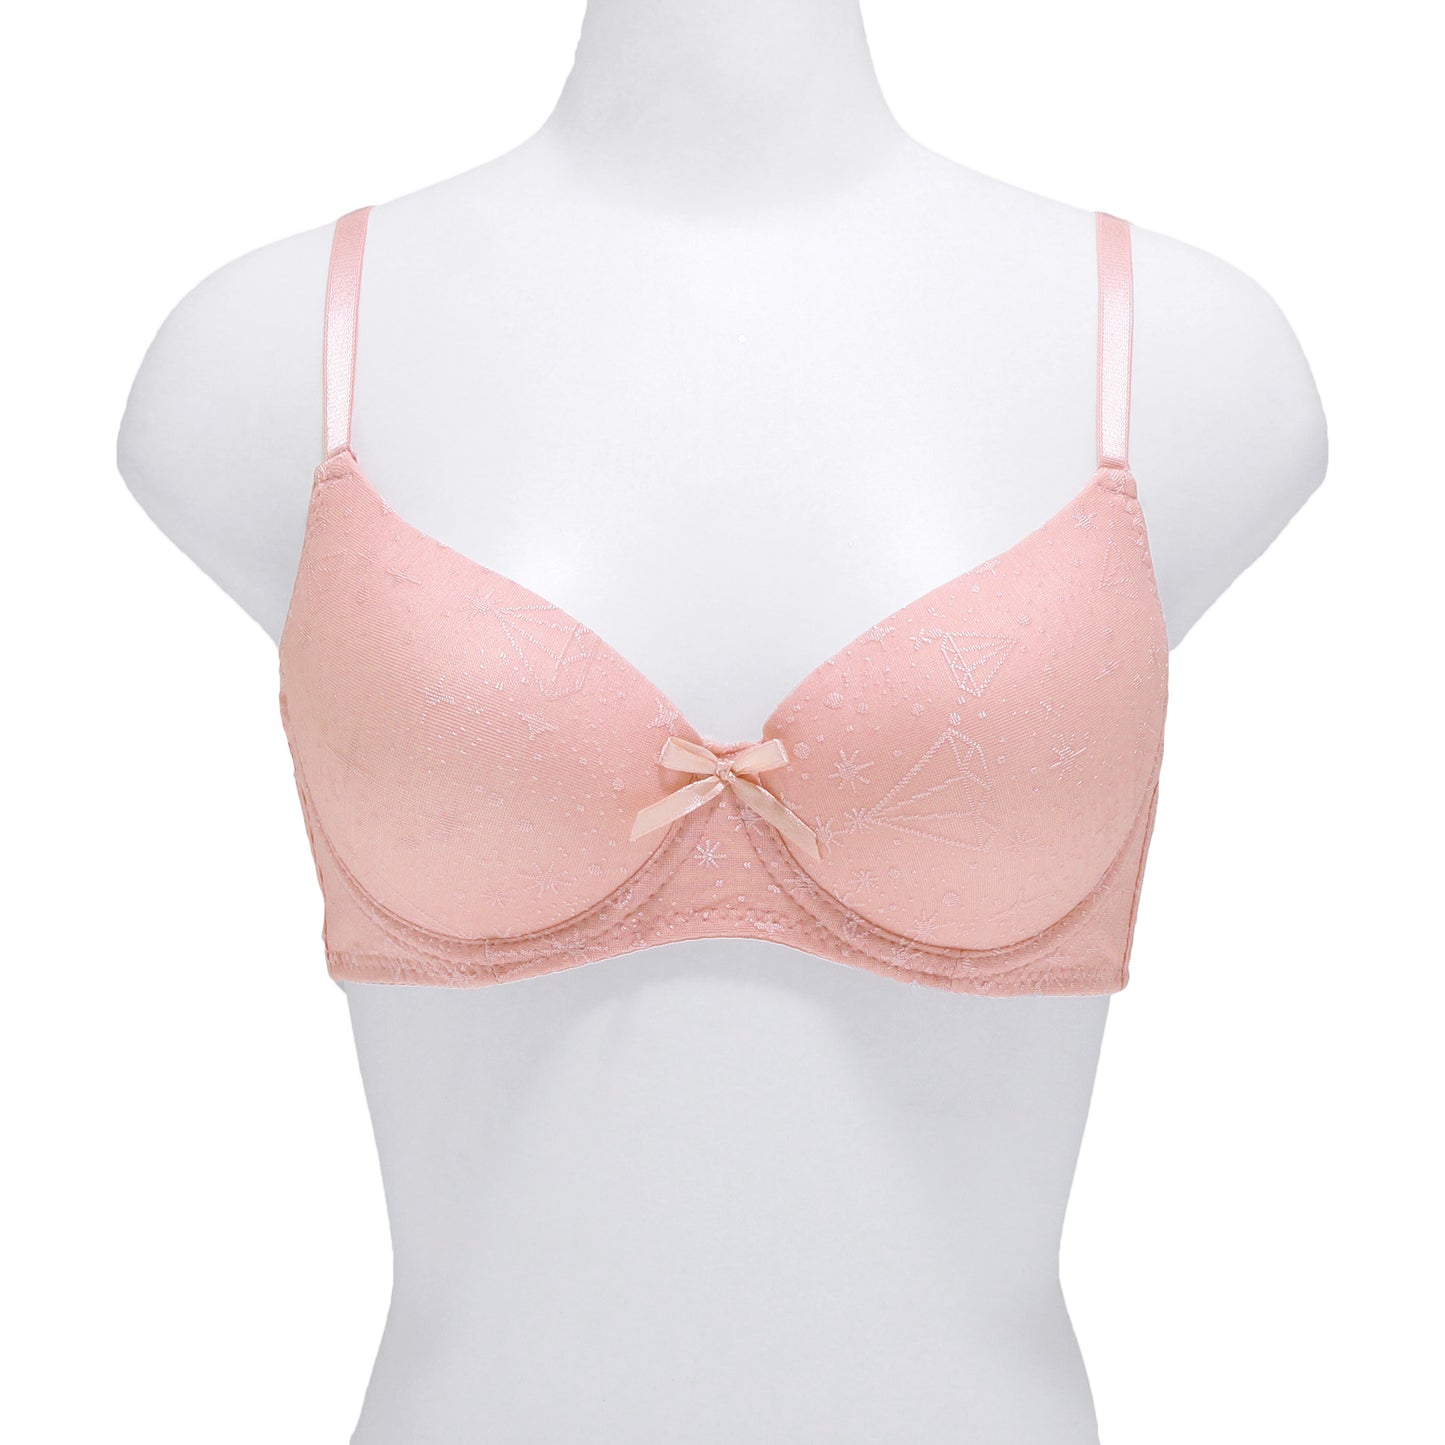 Wired A-Cup Bras with Embroidered Diamond Design (6-Pack)